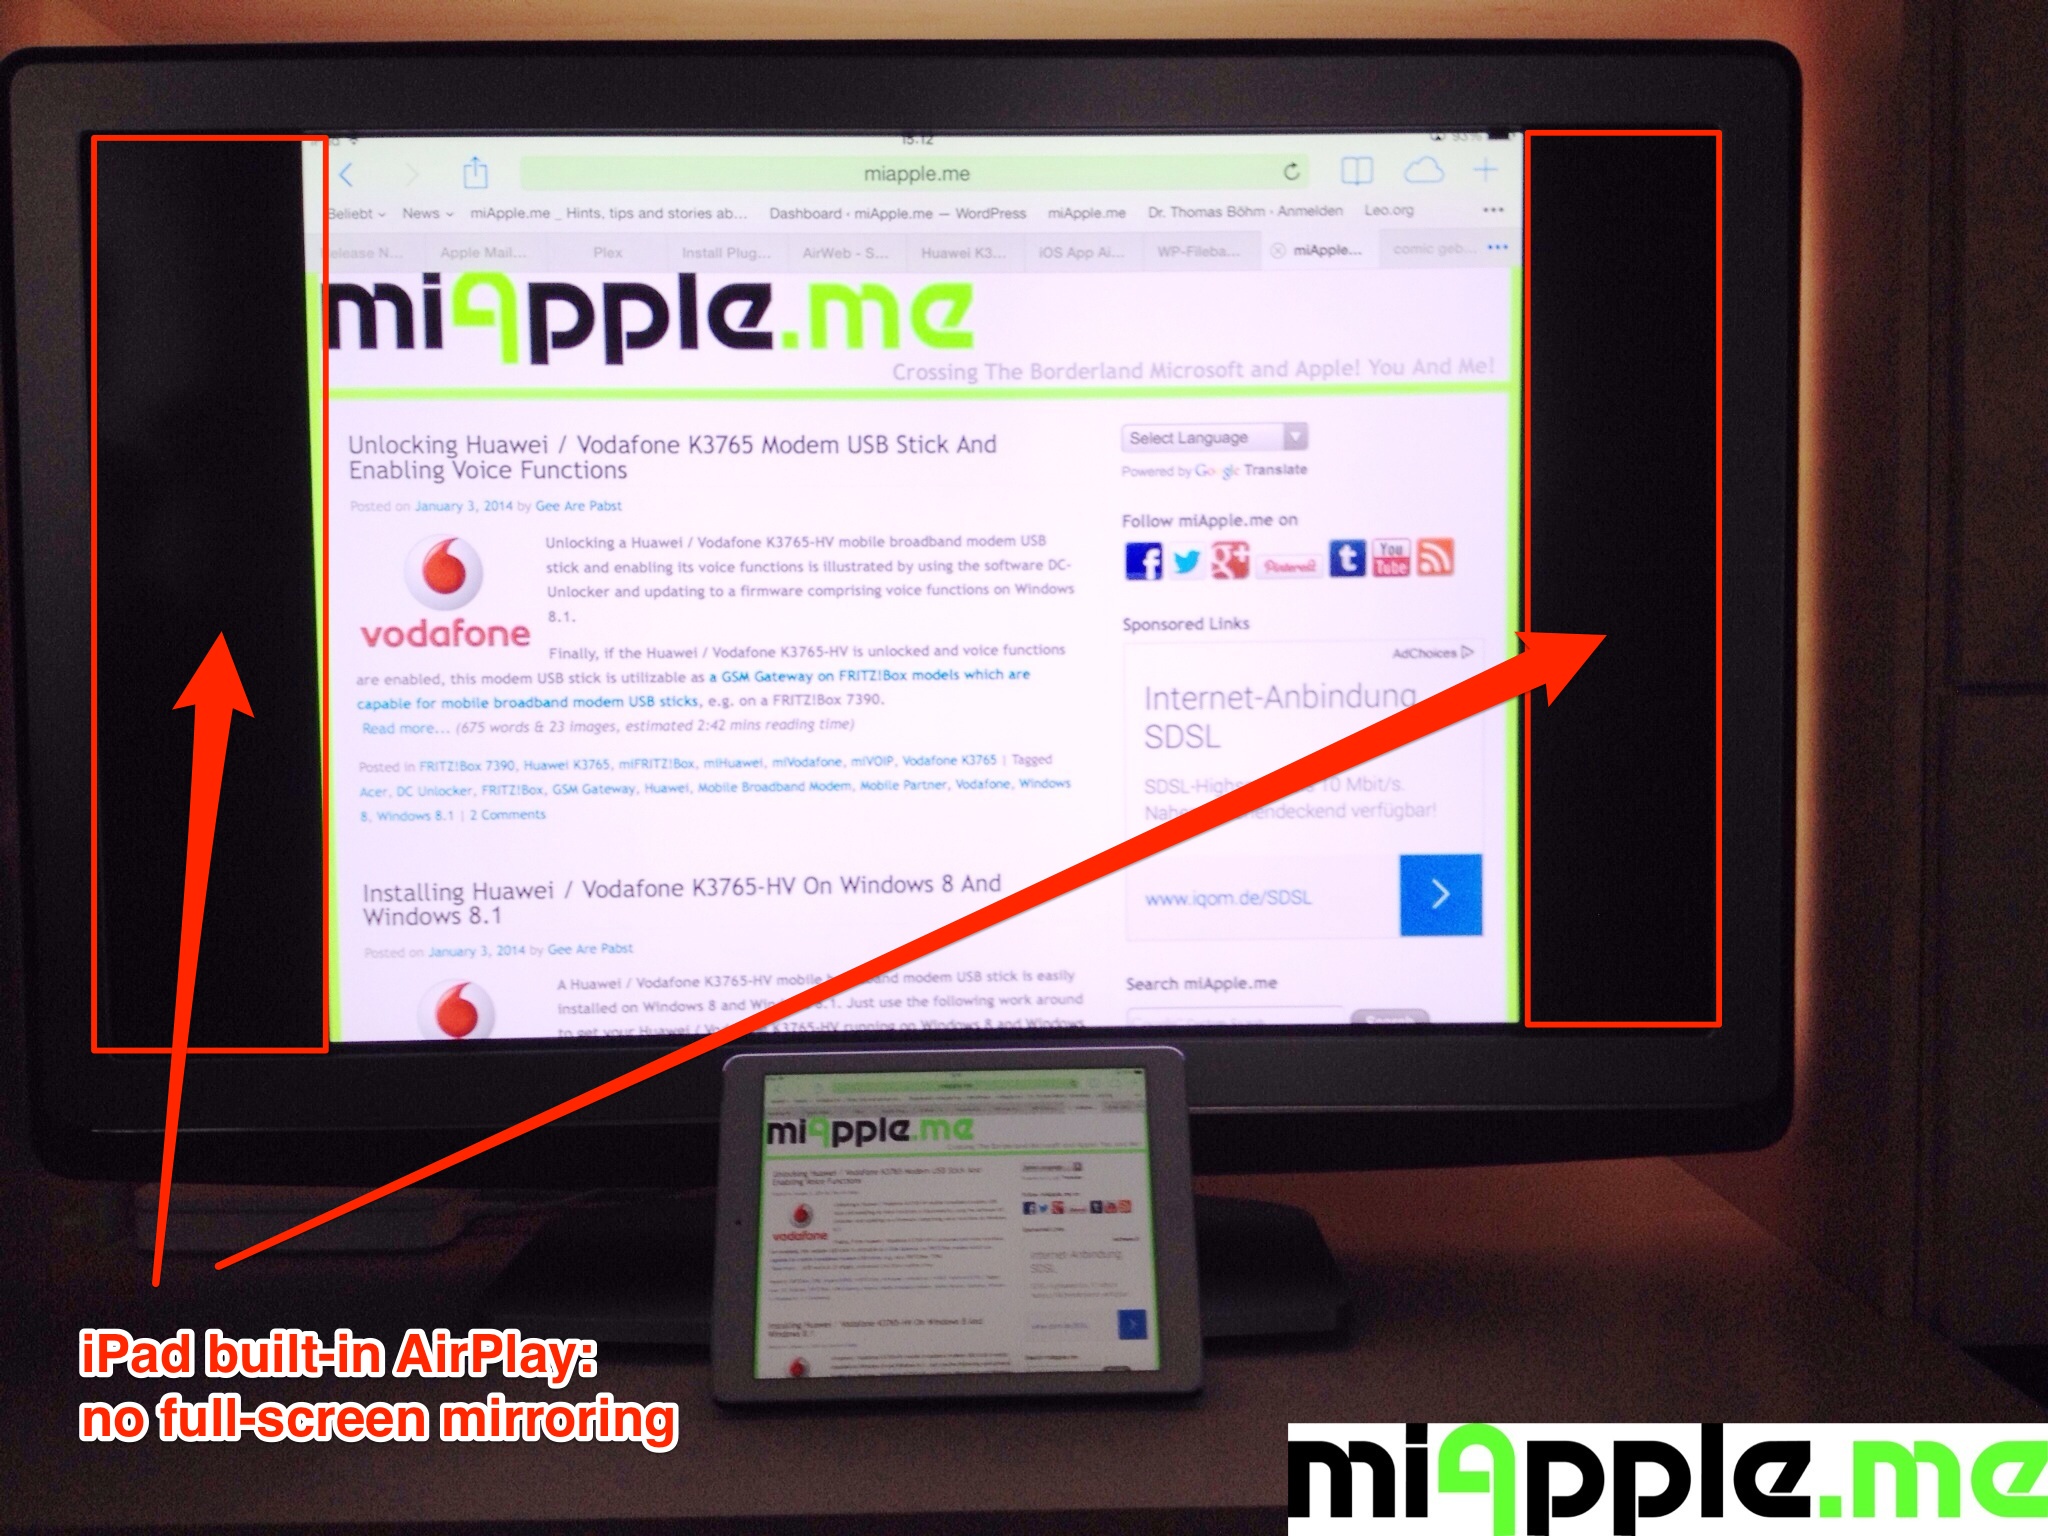 AirWeb Mirrors Web Browser In Full Screen To TV Via Apple TV AirPlay - miapple.me Tech.Blog